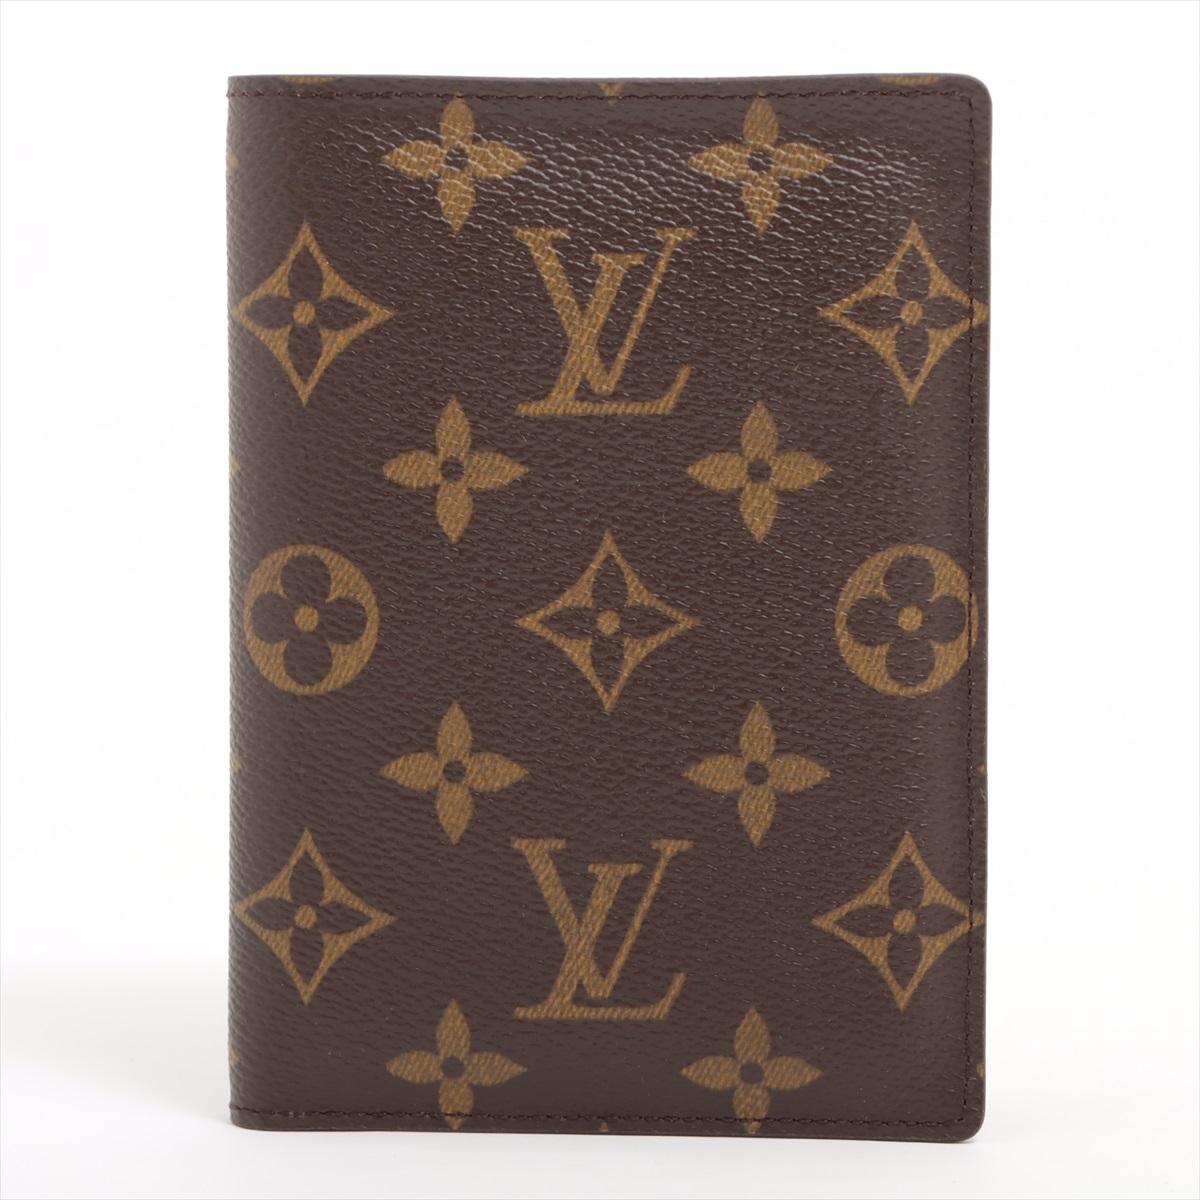 The Louis Vuitton Monogram Passport Cover is a stylish and practical accessory designed for the modern traveler. Crafted from the iconic Monogram canvas, the passport cover showcases Louis Vuitton's timeless design and craftsmanship. The classic